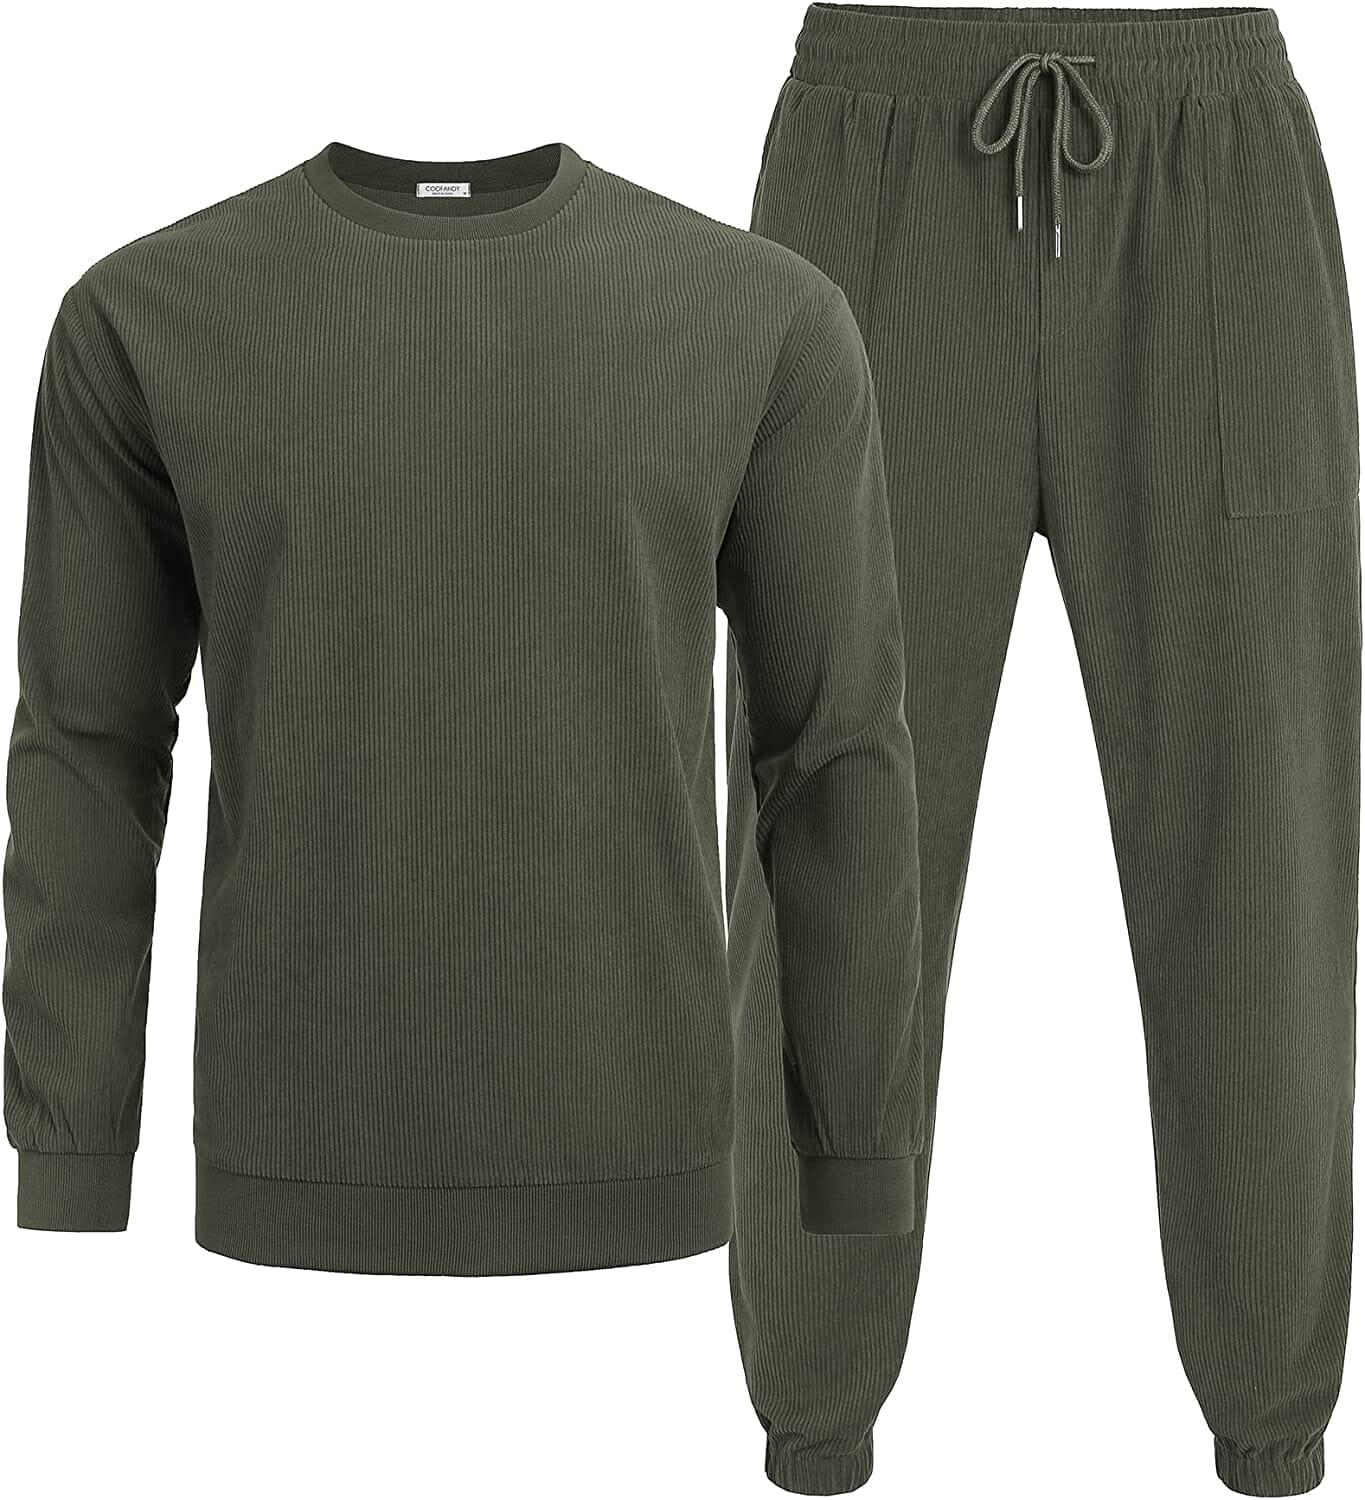 2 Piece Long Sleeve Pullover Sports Sets (US Only) Sports Set Coofandy's Army Green S 